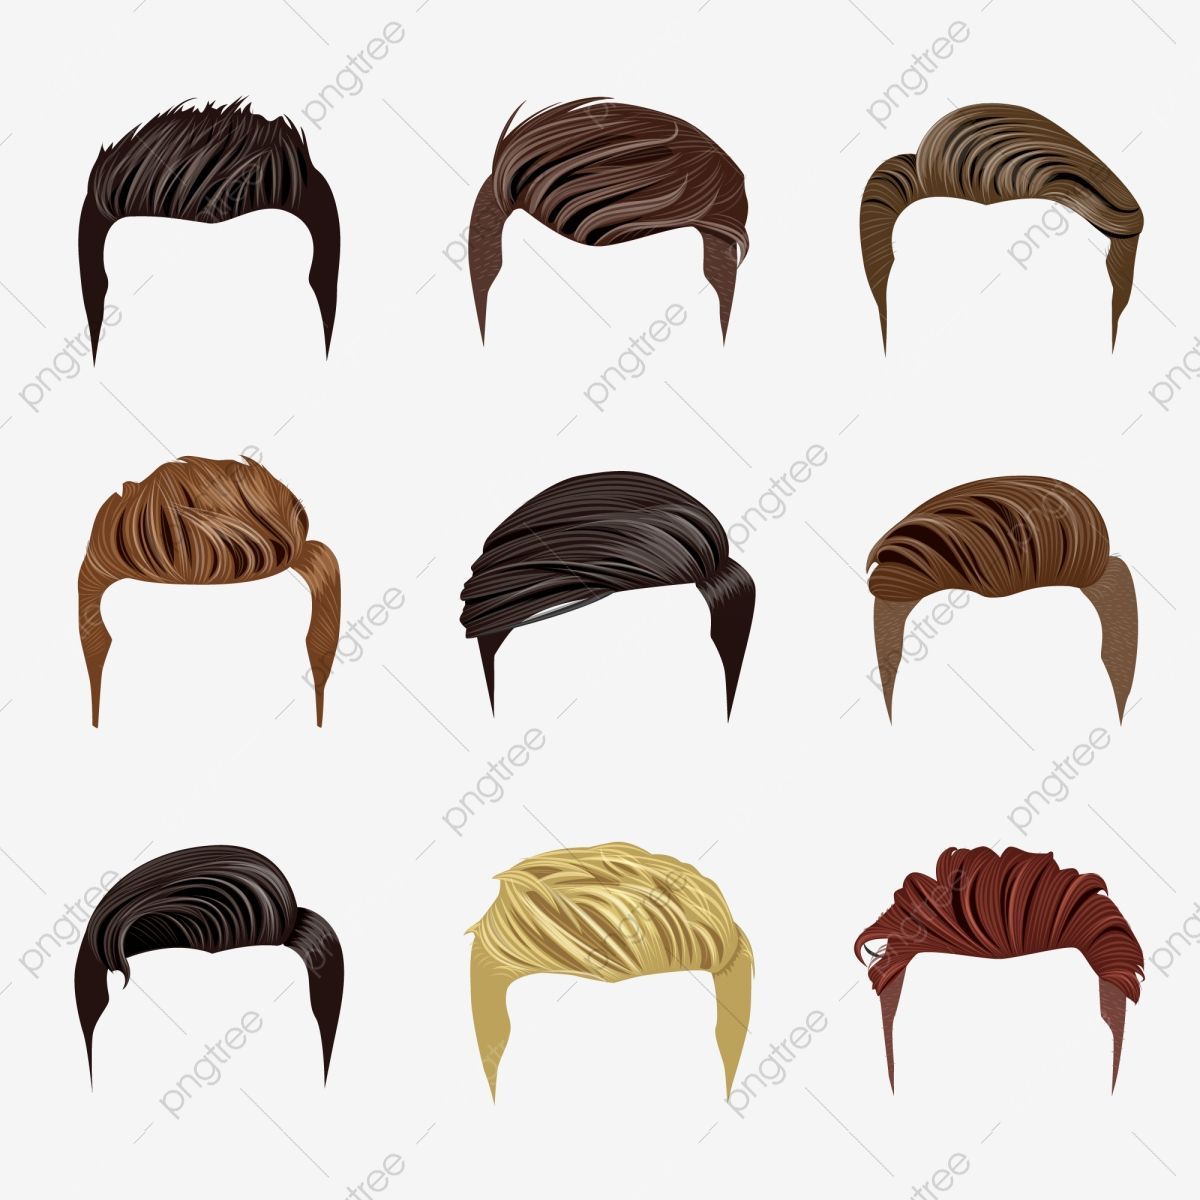 Set Of Mens Hairstyles, Hair, Hairstyles, Haircut PNG and Vector with Transparent Background for Free Download -   6 hairstyles For Men png ideas